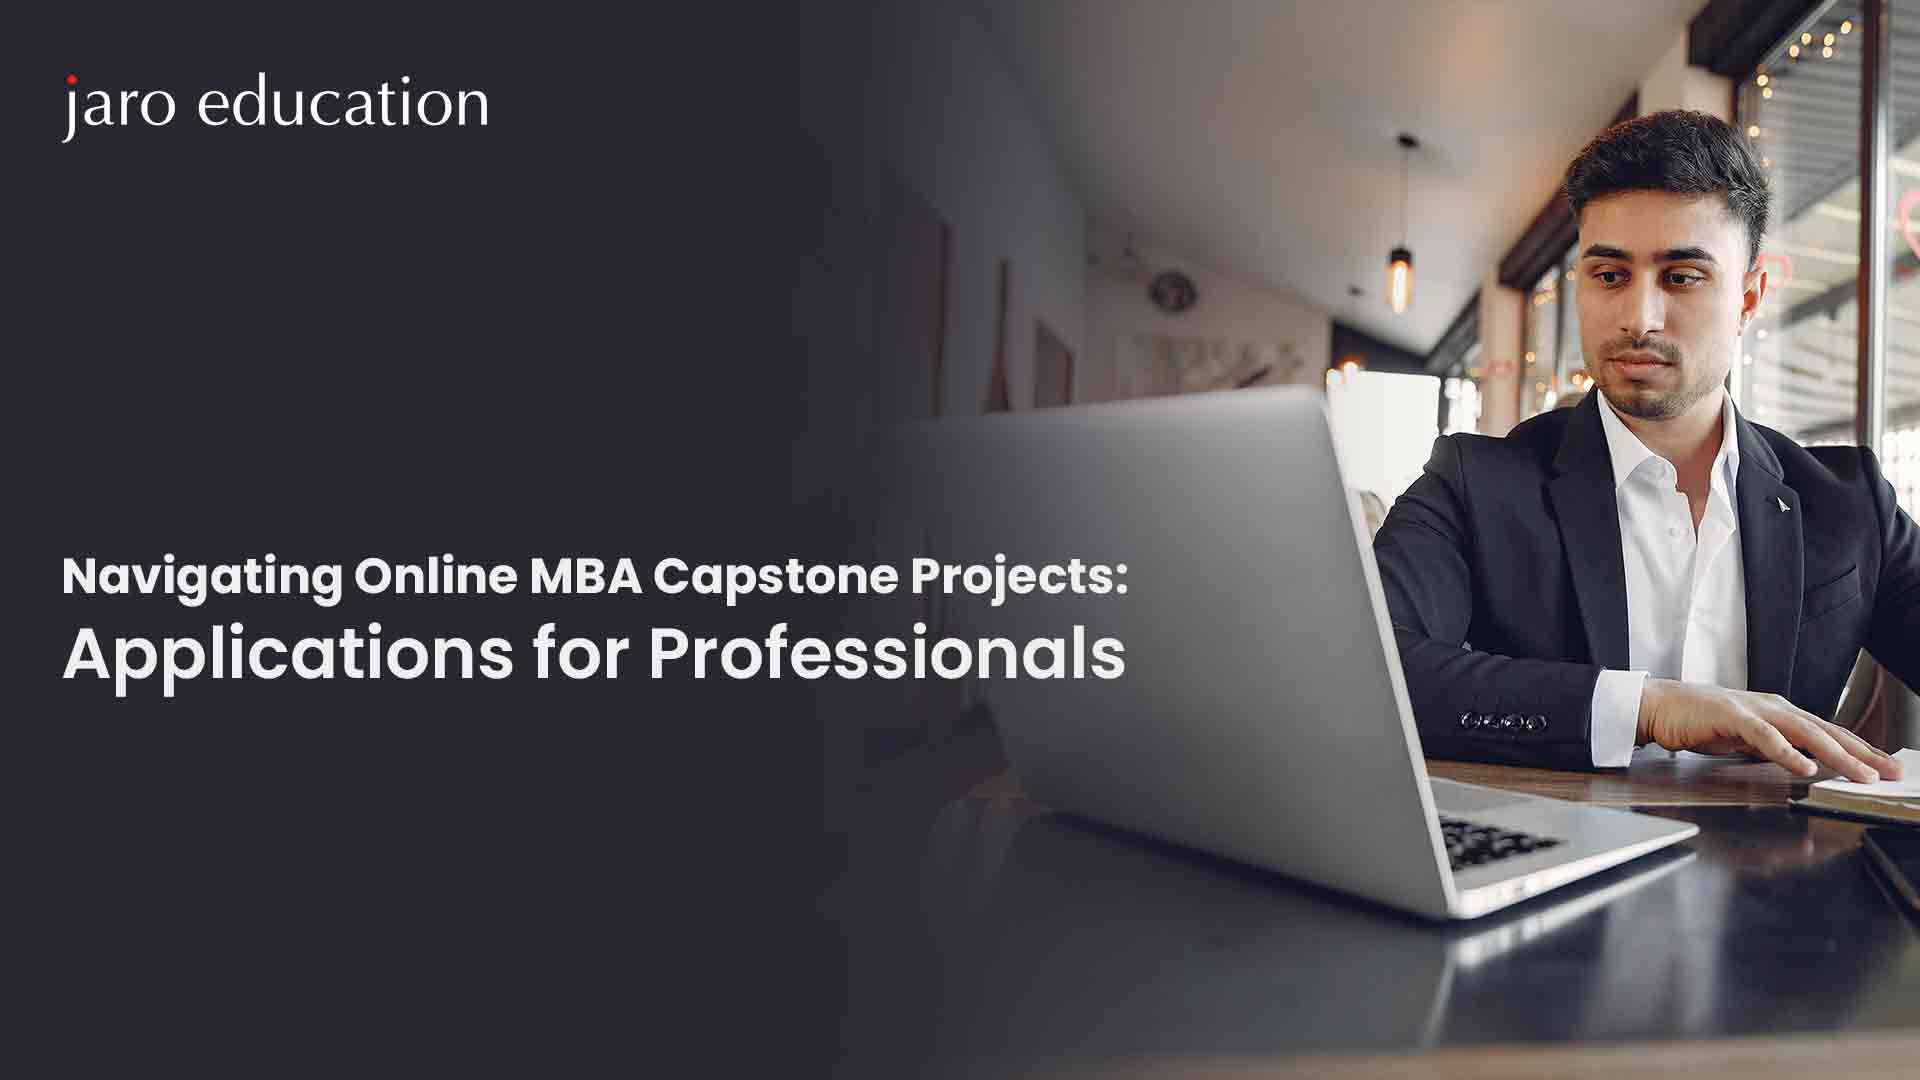 Navigating Online MBA Capstone Projects Applications for Professionals